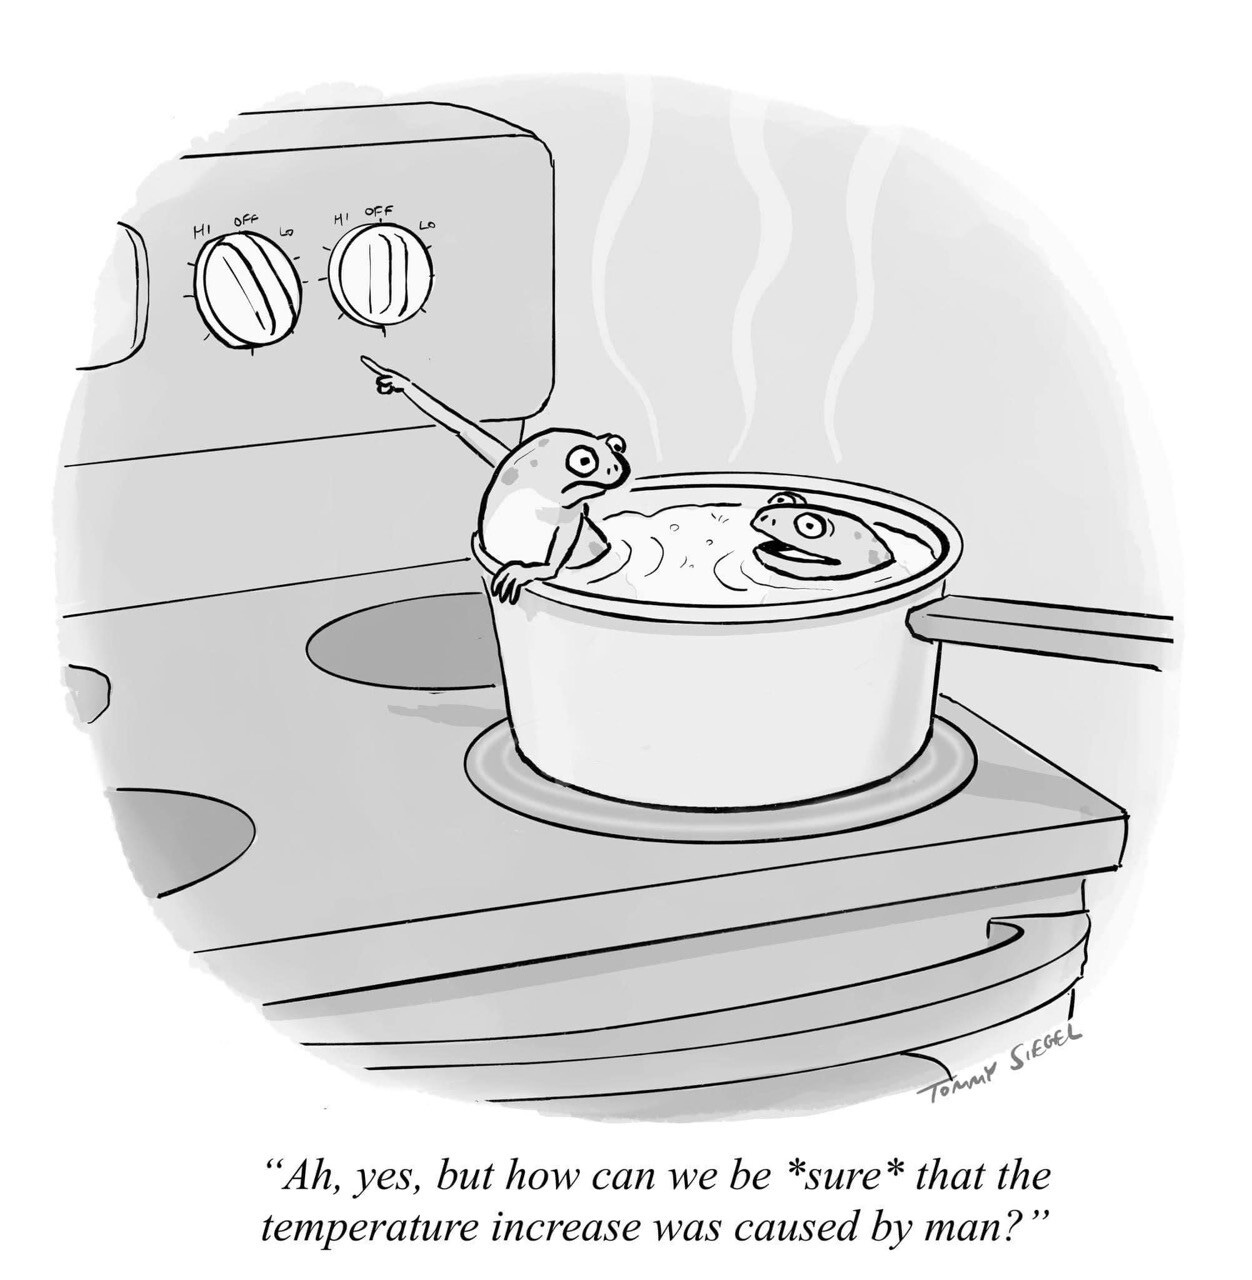 Cartoon of two frogs in a saucepan of water on a stovetop. One is desperately pointing at the control knobs on the stove, and the other replies: 
“Ah, yes, but how can we be "sure” that the temperature increase was caused by man?”

~ Tommy Siegel